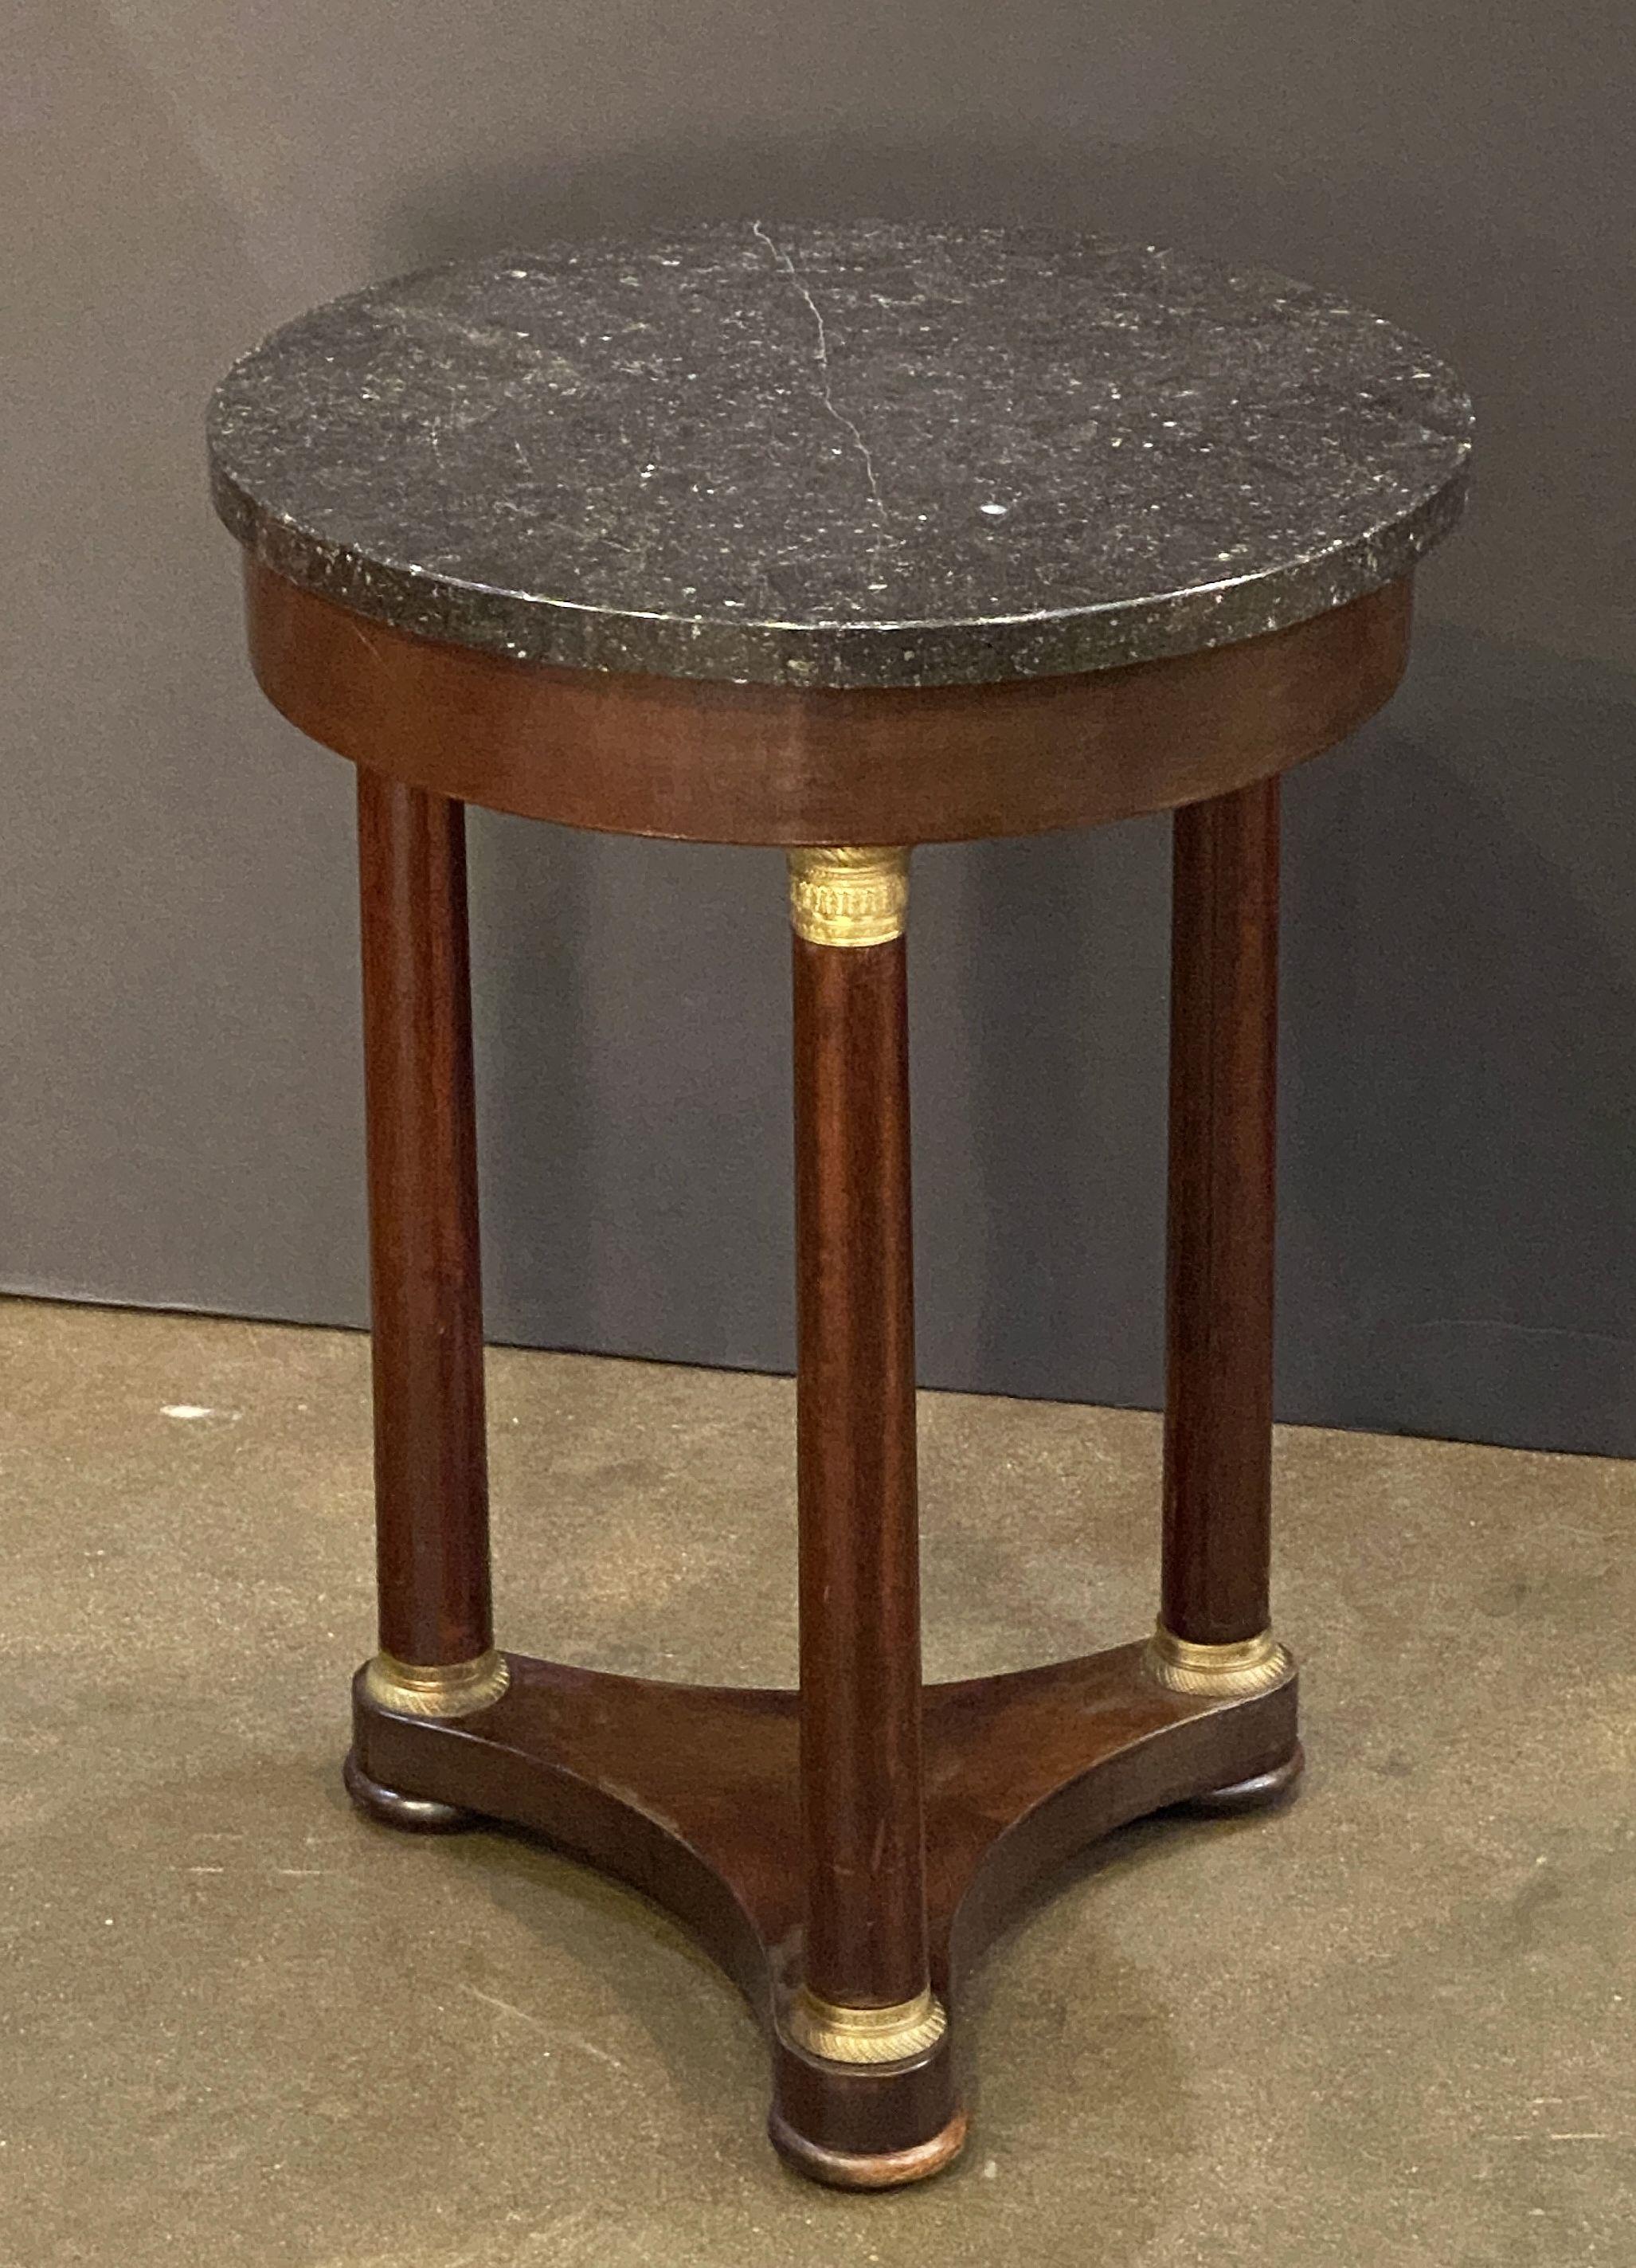 French Marble-Top Gueridon Table or Guéridon in the Empire Style For Sale 3